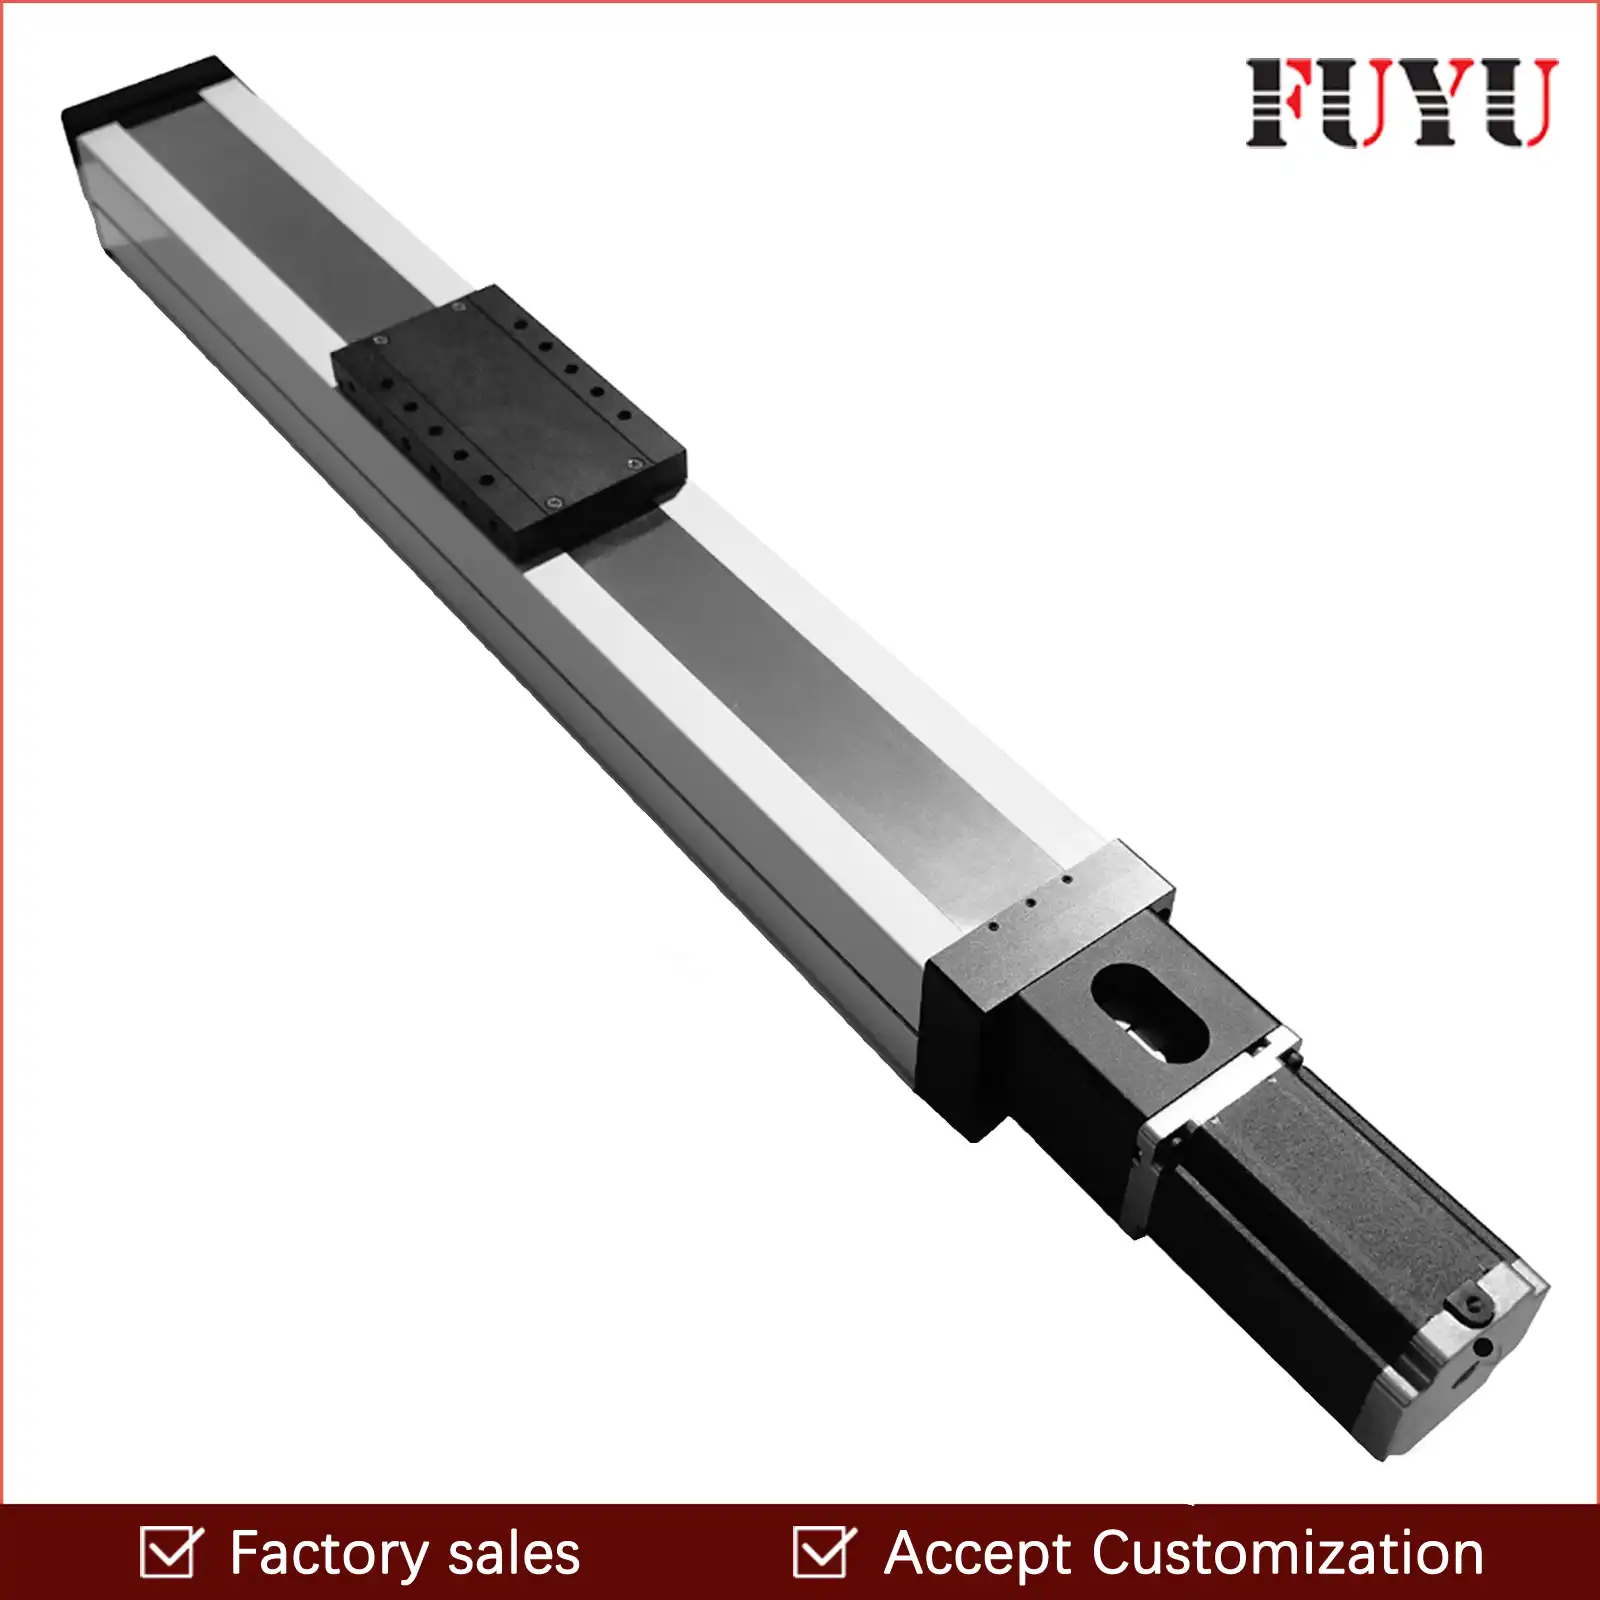 SGX Series Motion Sliding Table System Antrella 600mm Effective Travel Length Ball Screw Linear Guide Slide Memory RM1204 SFU1204 with 57 Stepper Motor Nema 23 for CNC and 3D Printer